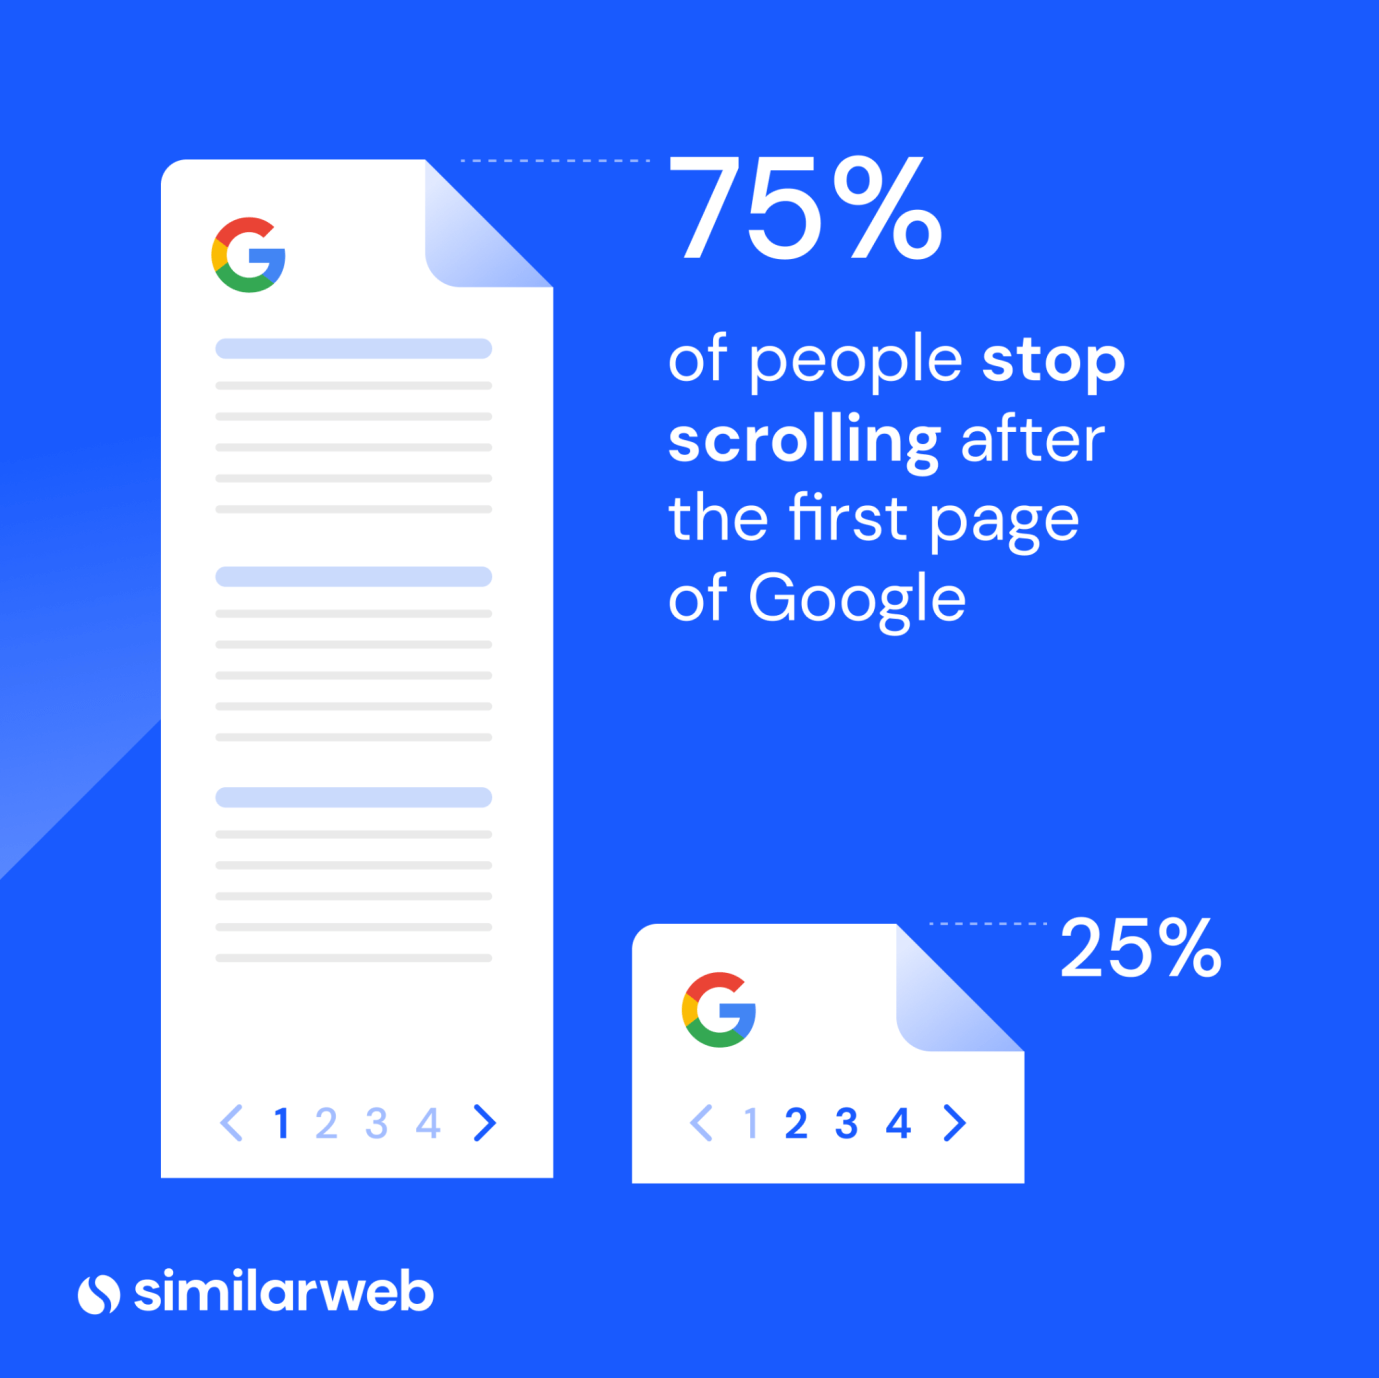 75% of people stop scrolling after the first page of Google.